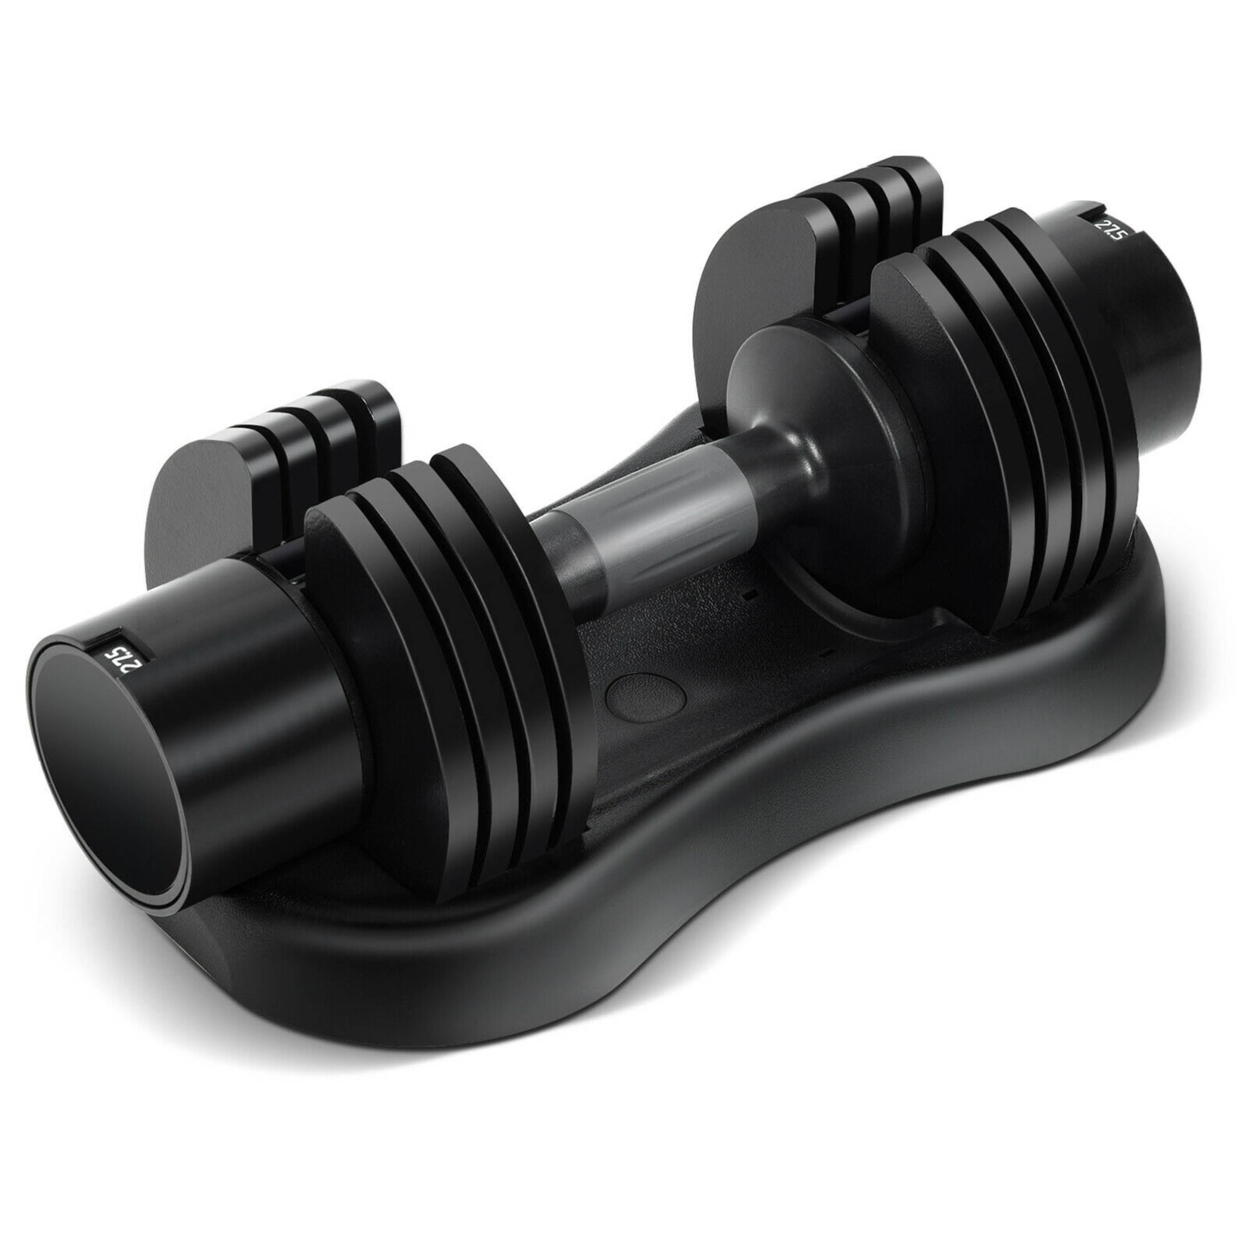 27.5lbs 5-in-1 Adjustable Dumbbell One-hand Quick Adjustment For Gym Home Office